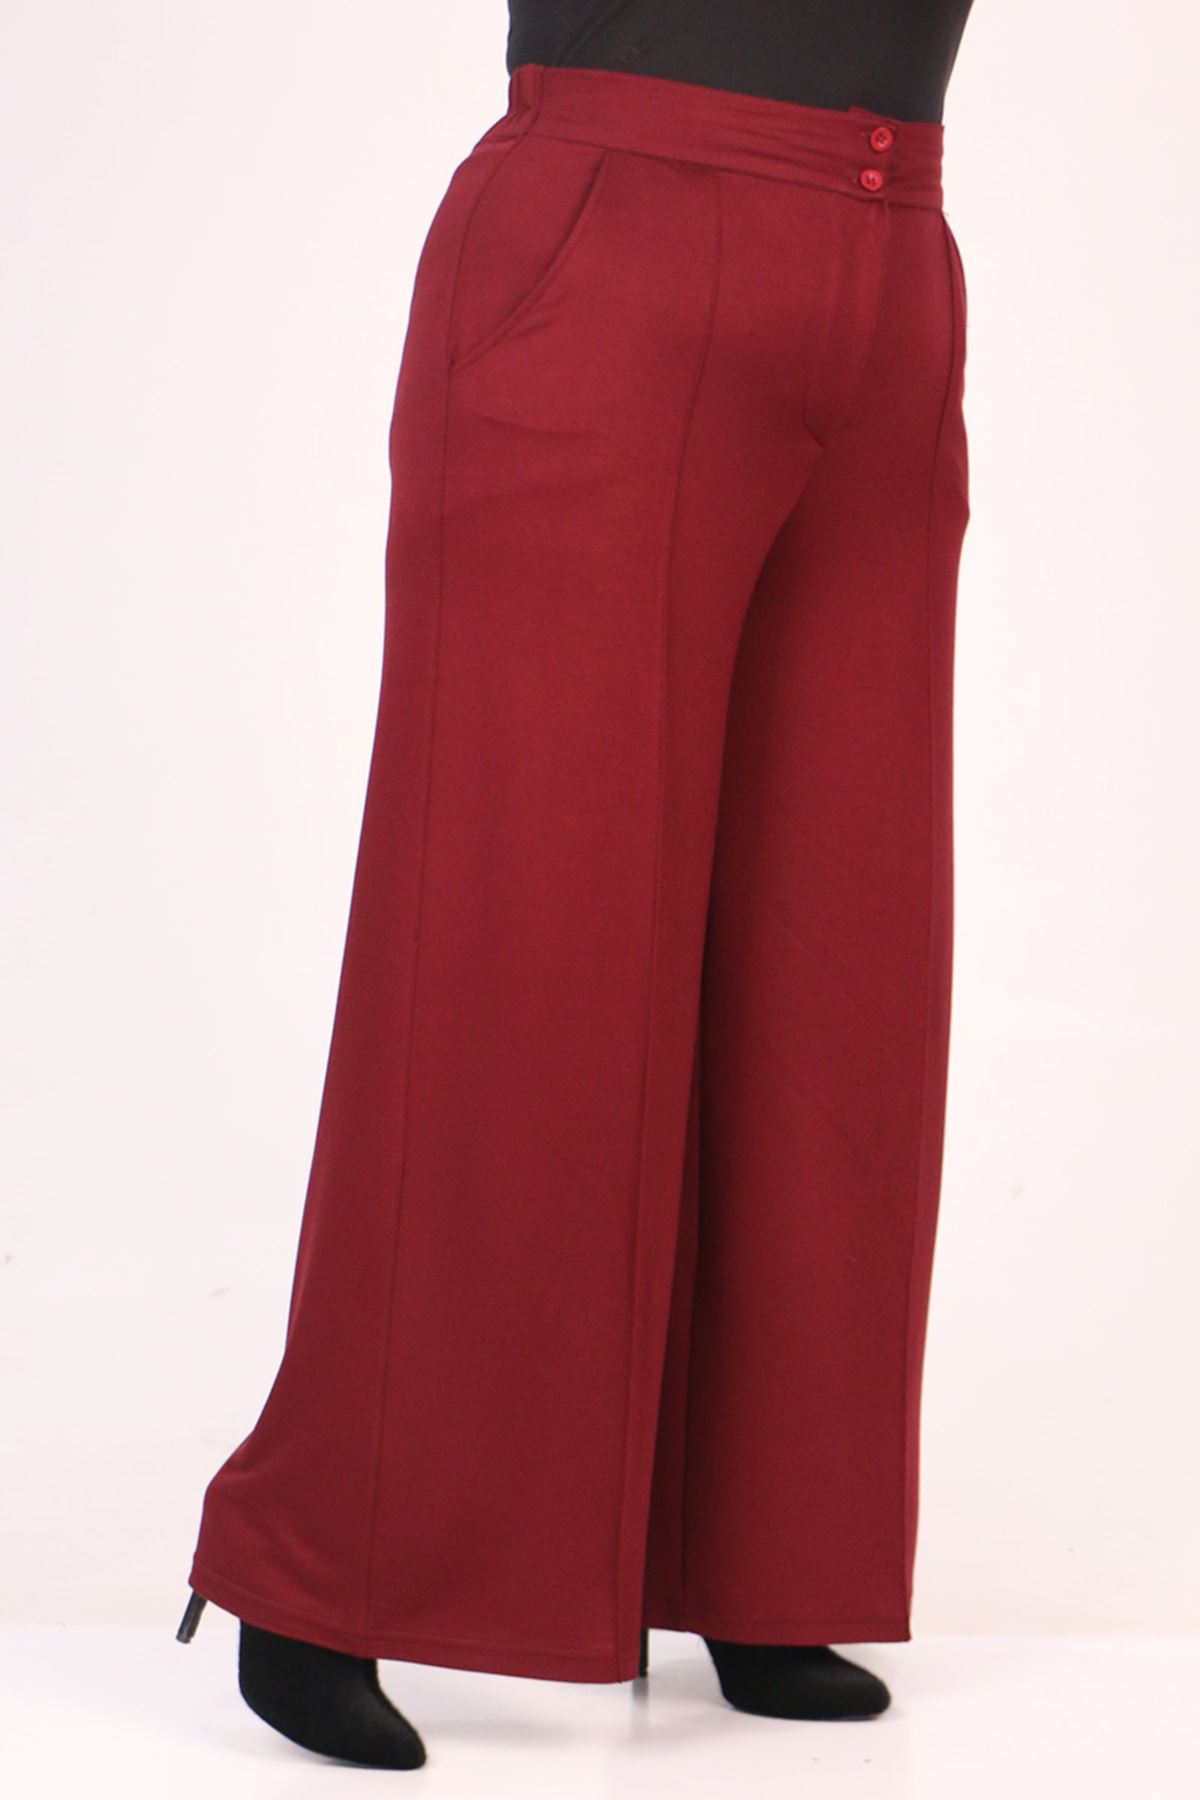 39502 Large Size Crystal Two Thread Trousers with Elastic Back - Burgundy